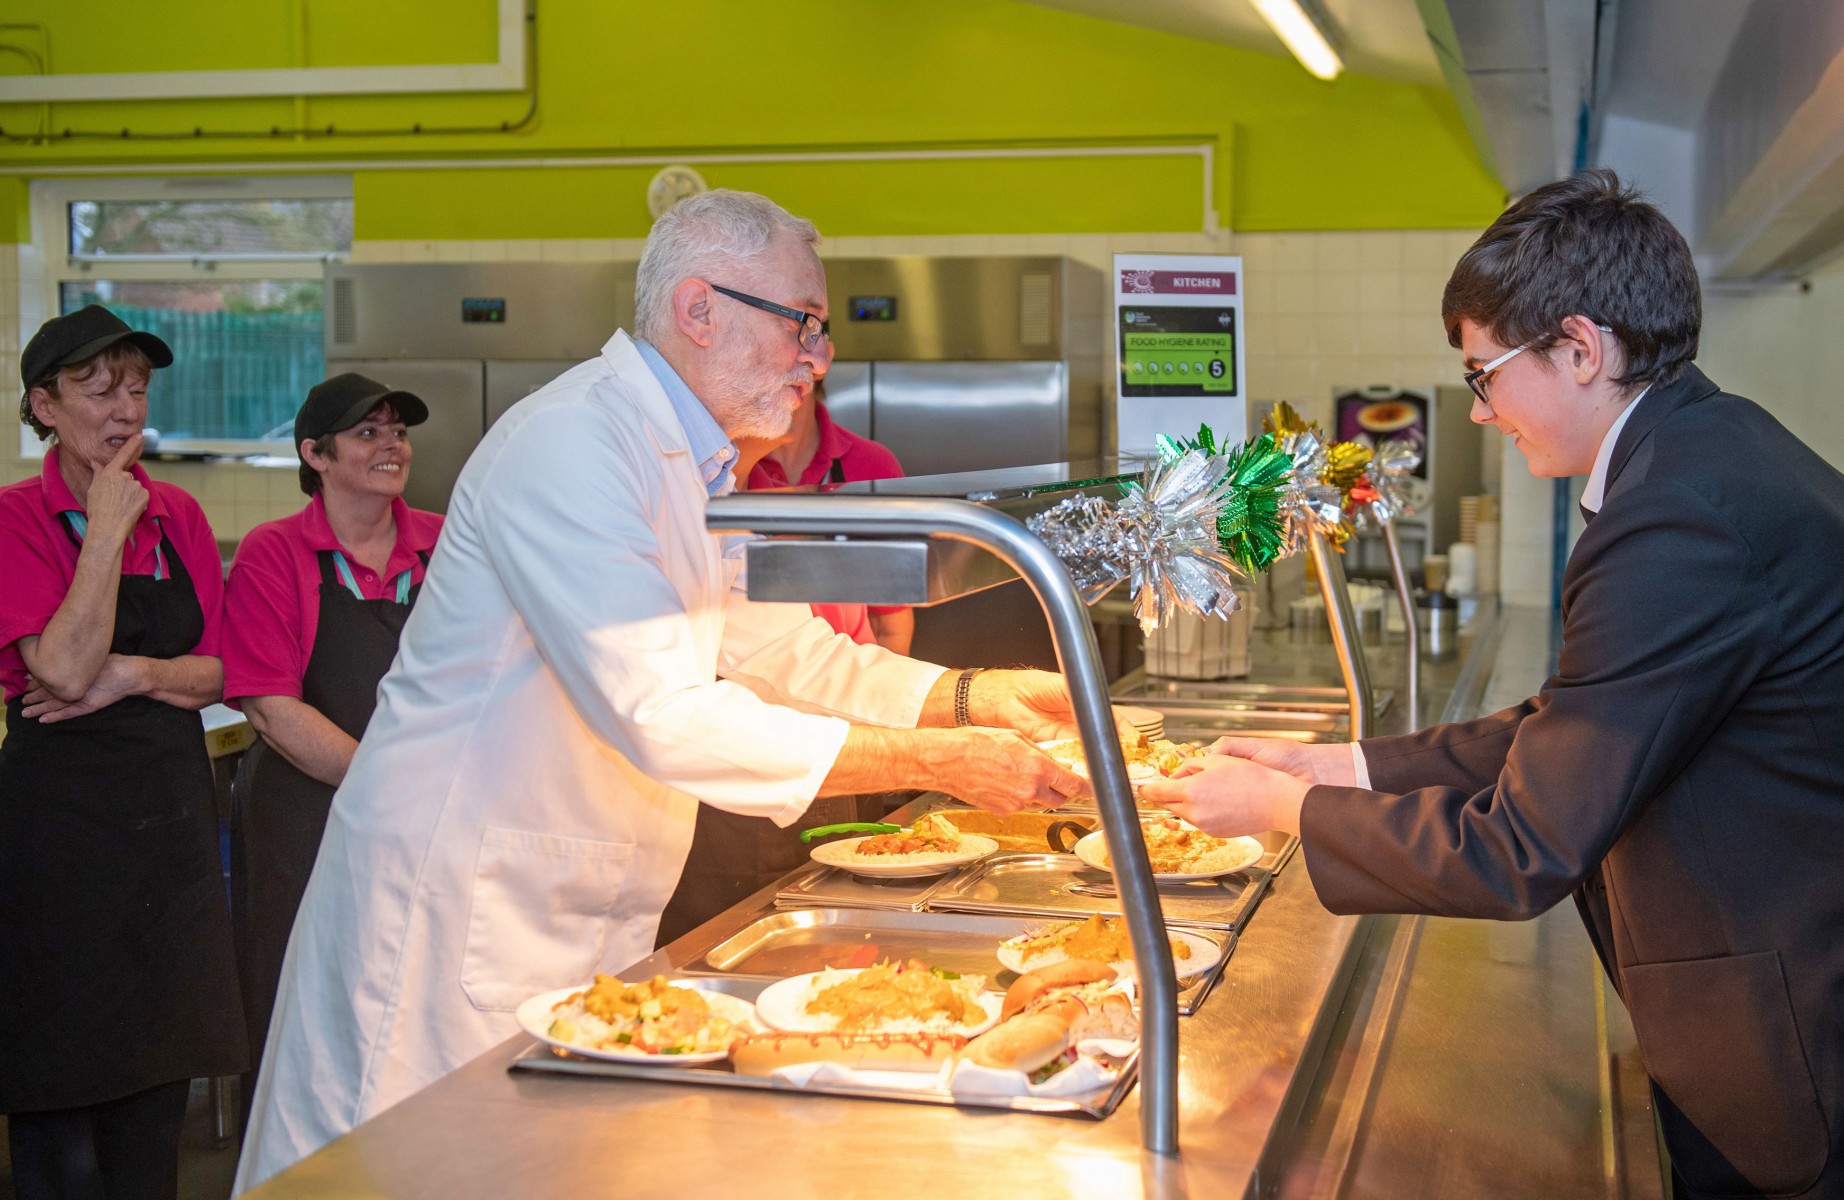 The Labour leader has been serving school dinners at Bilton High School